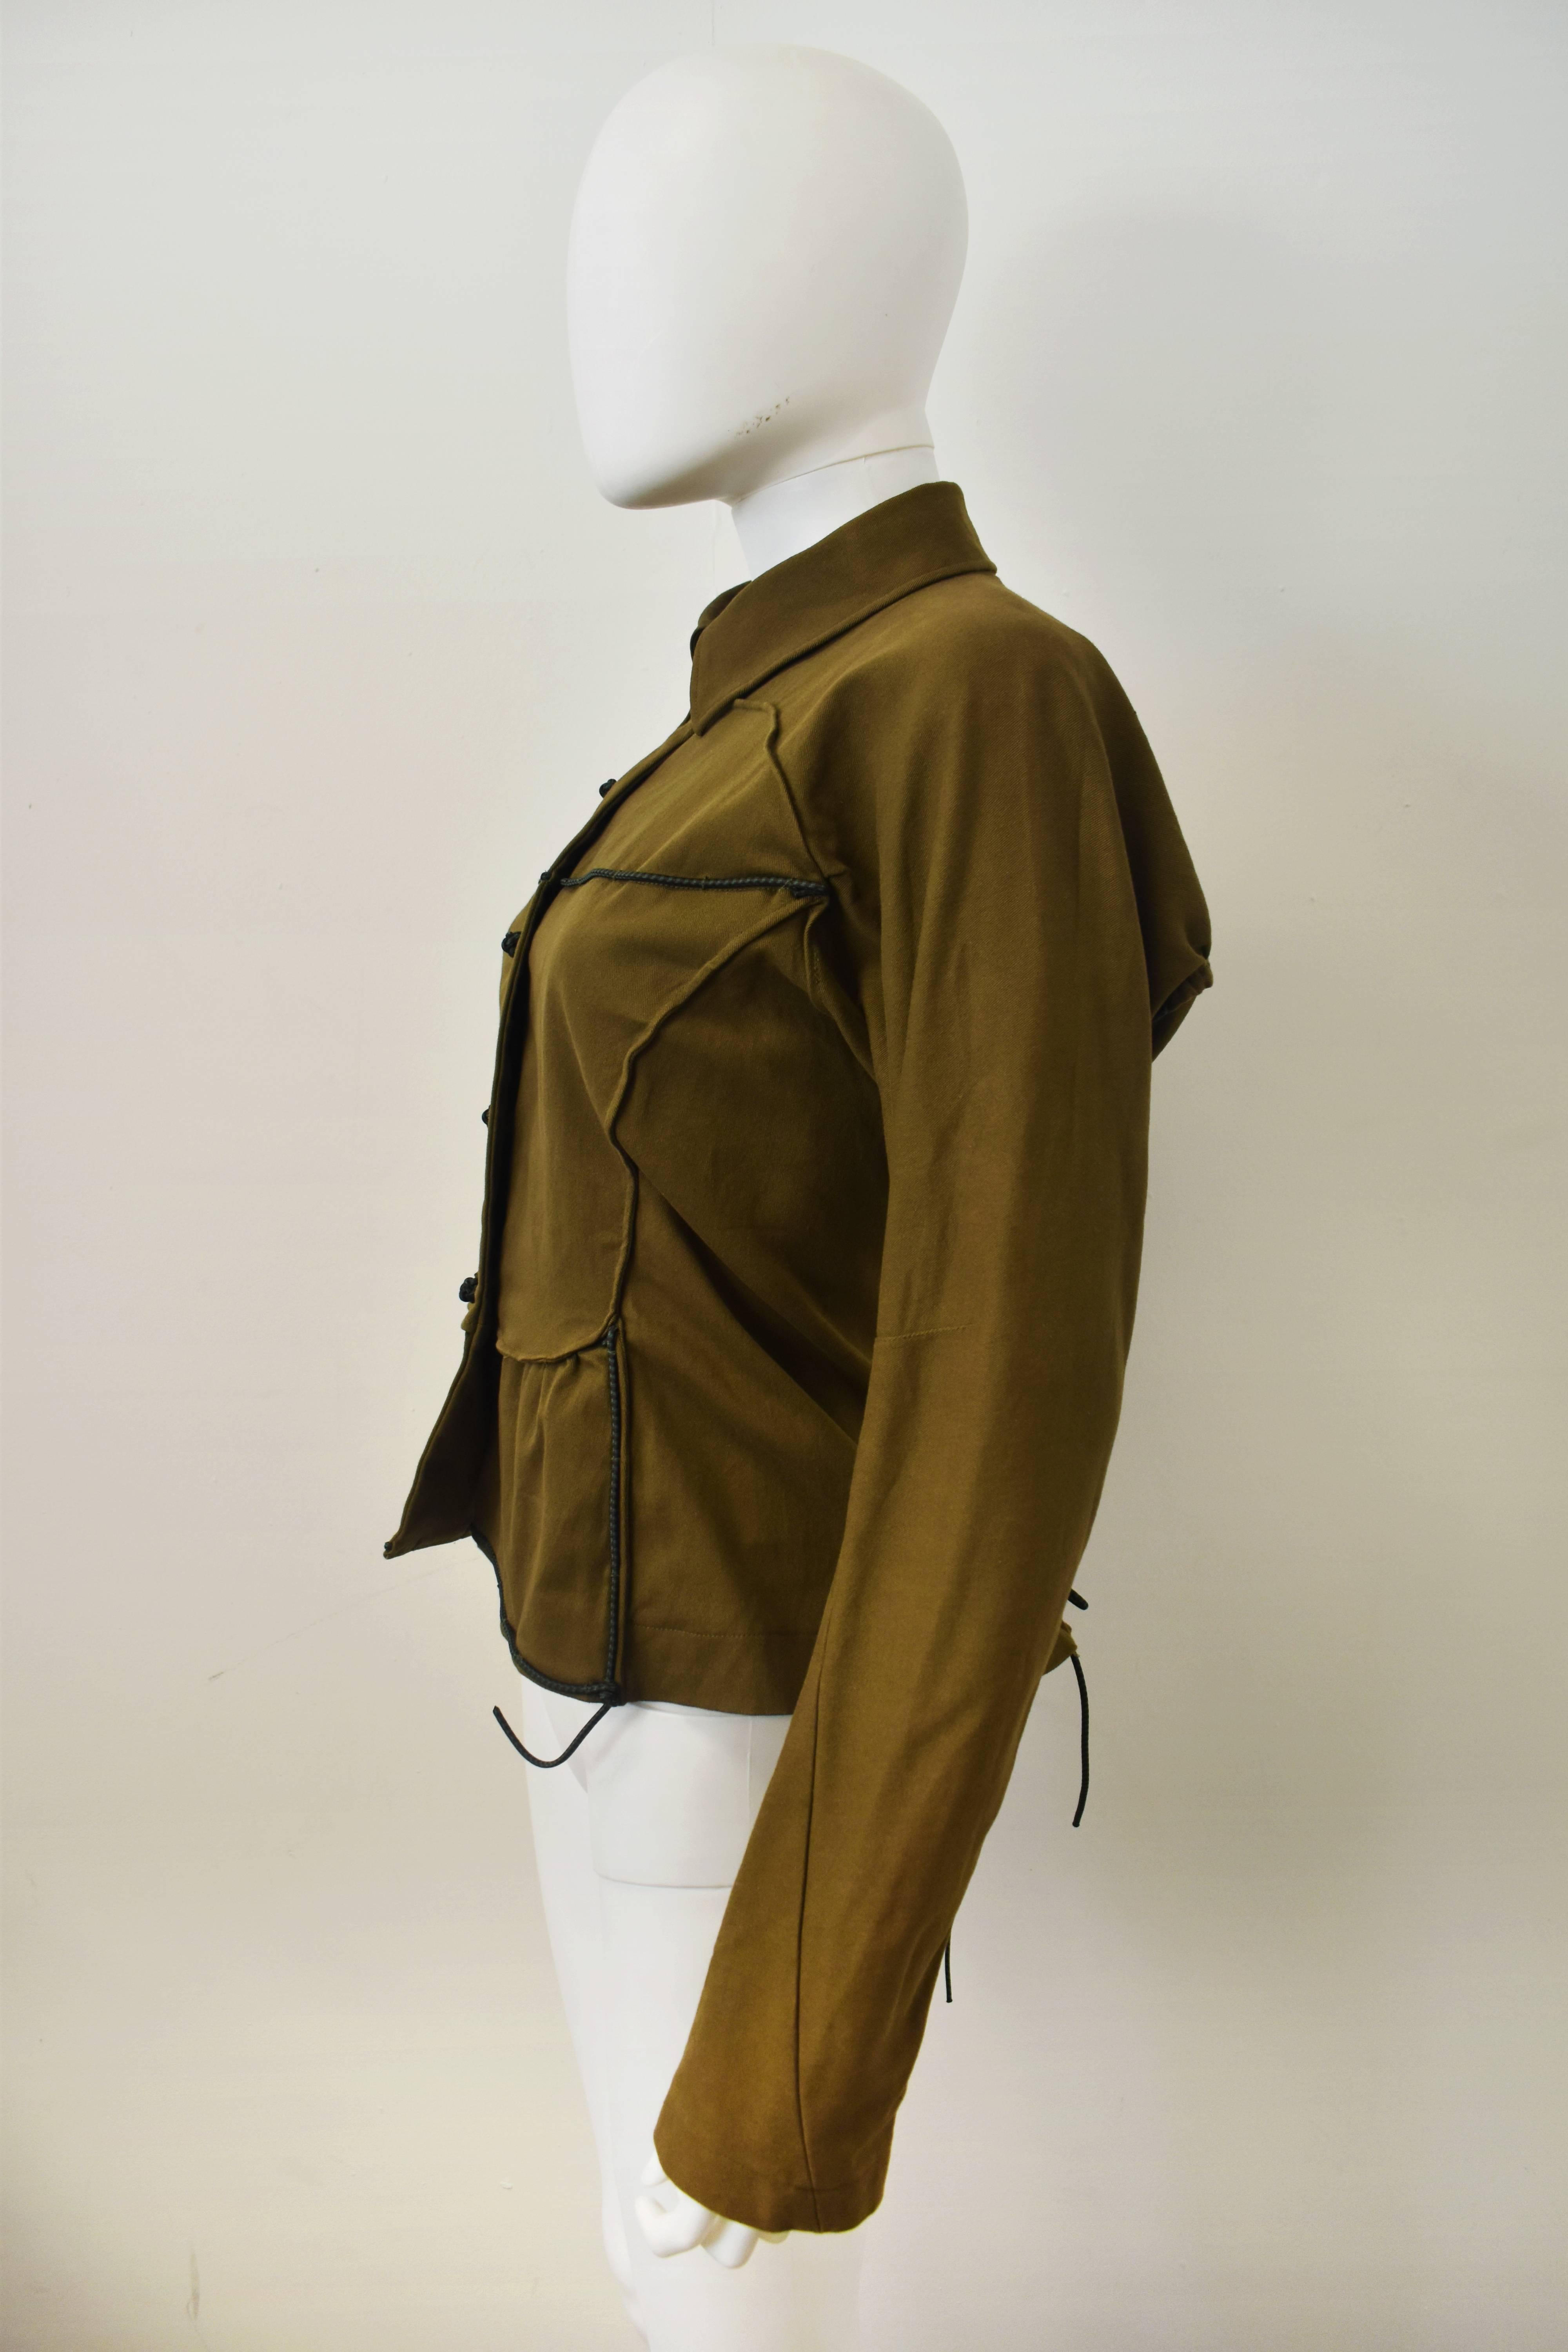 A khaki jacket with innovative elastic piping and an elastic corset tie-back details from Issey Miyake. Giving the classic safari jacket a sporty twist, the jacket has an unusual bib front with contrast elastic piping and elastic knot buttons. As